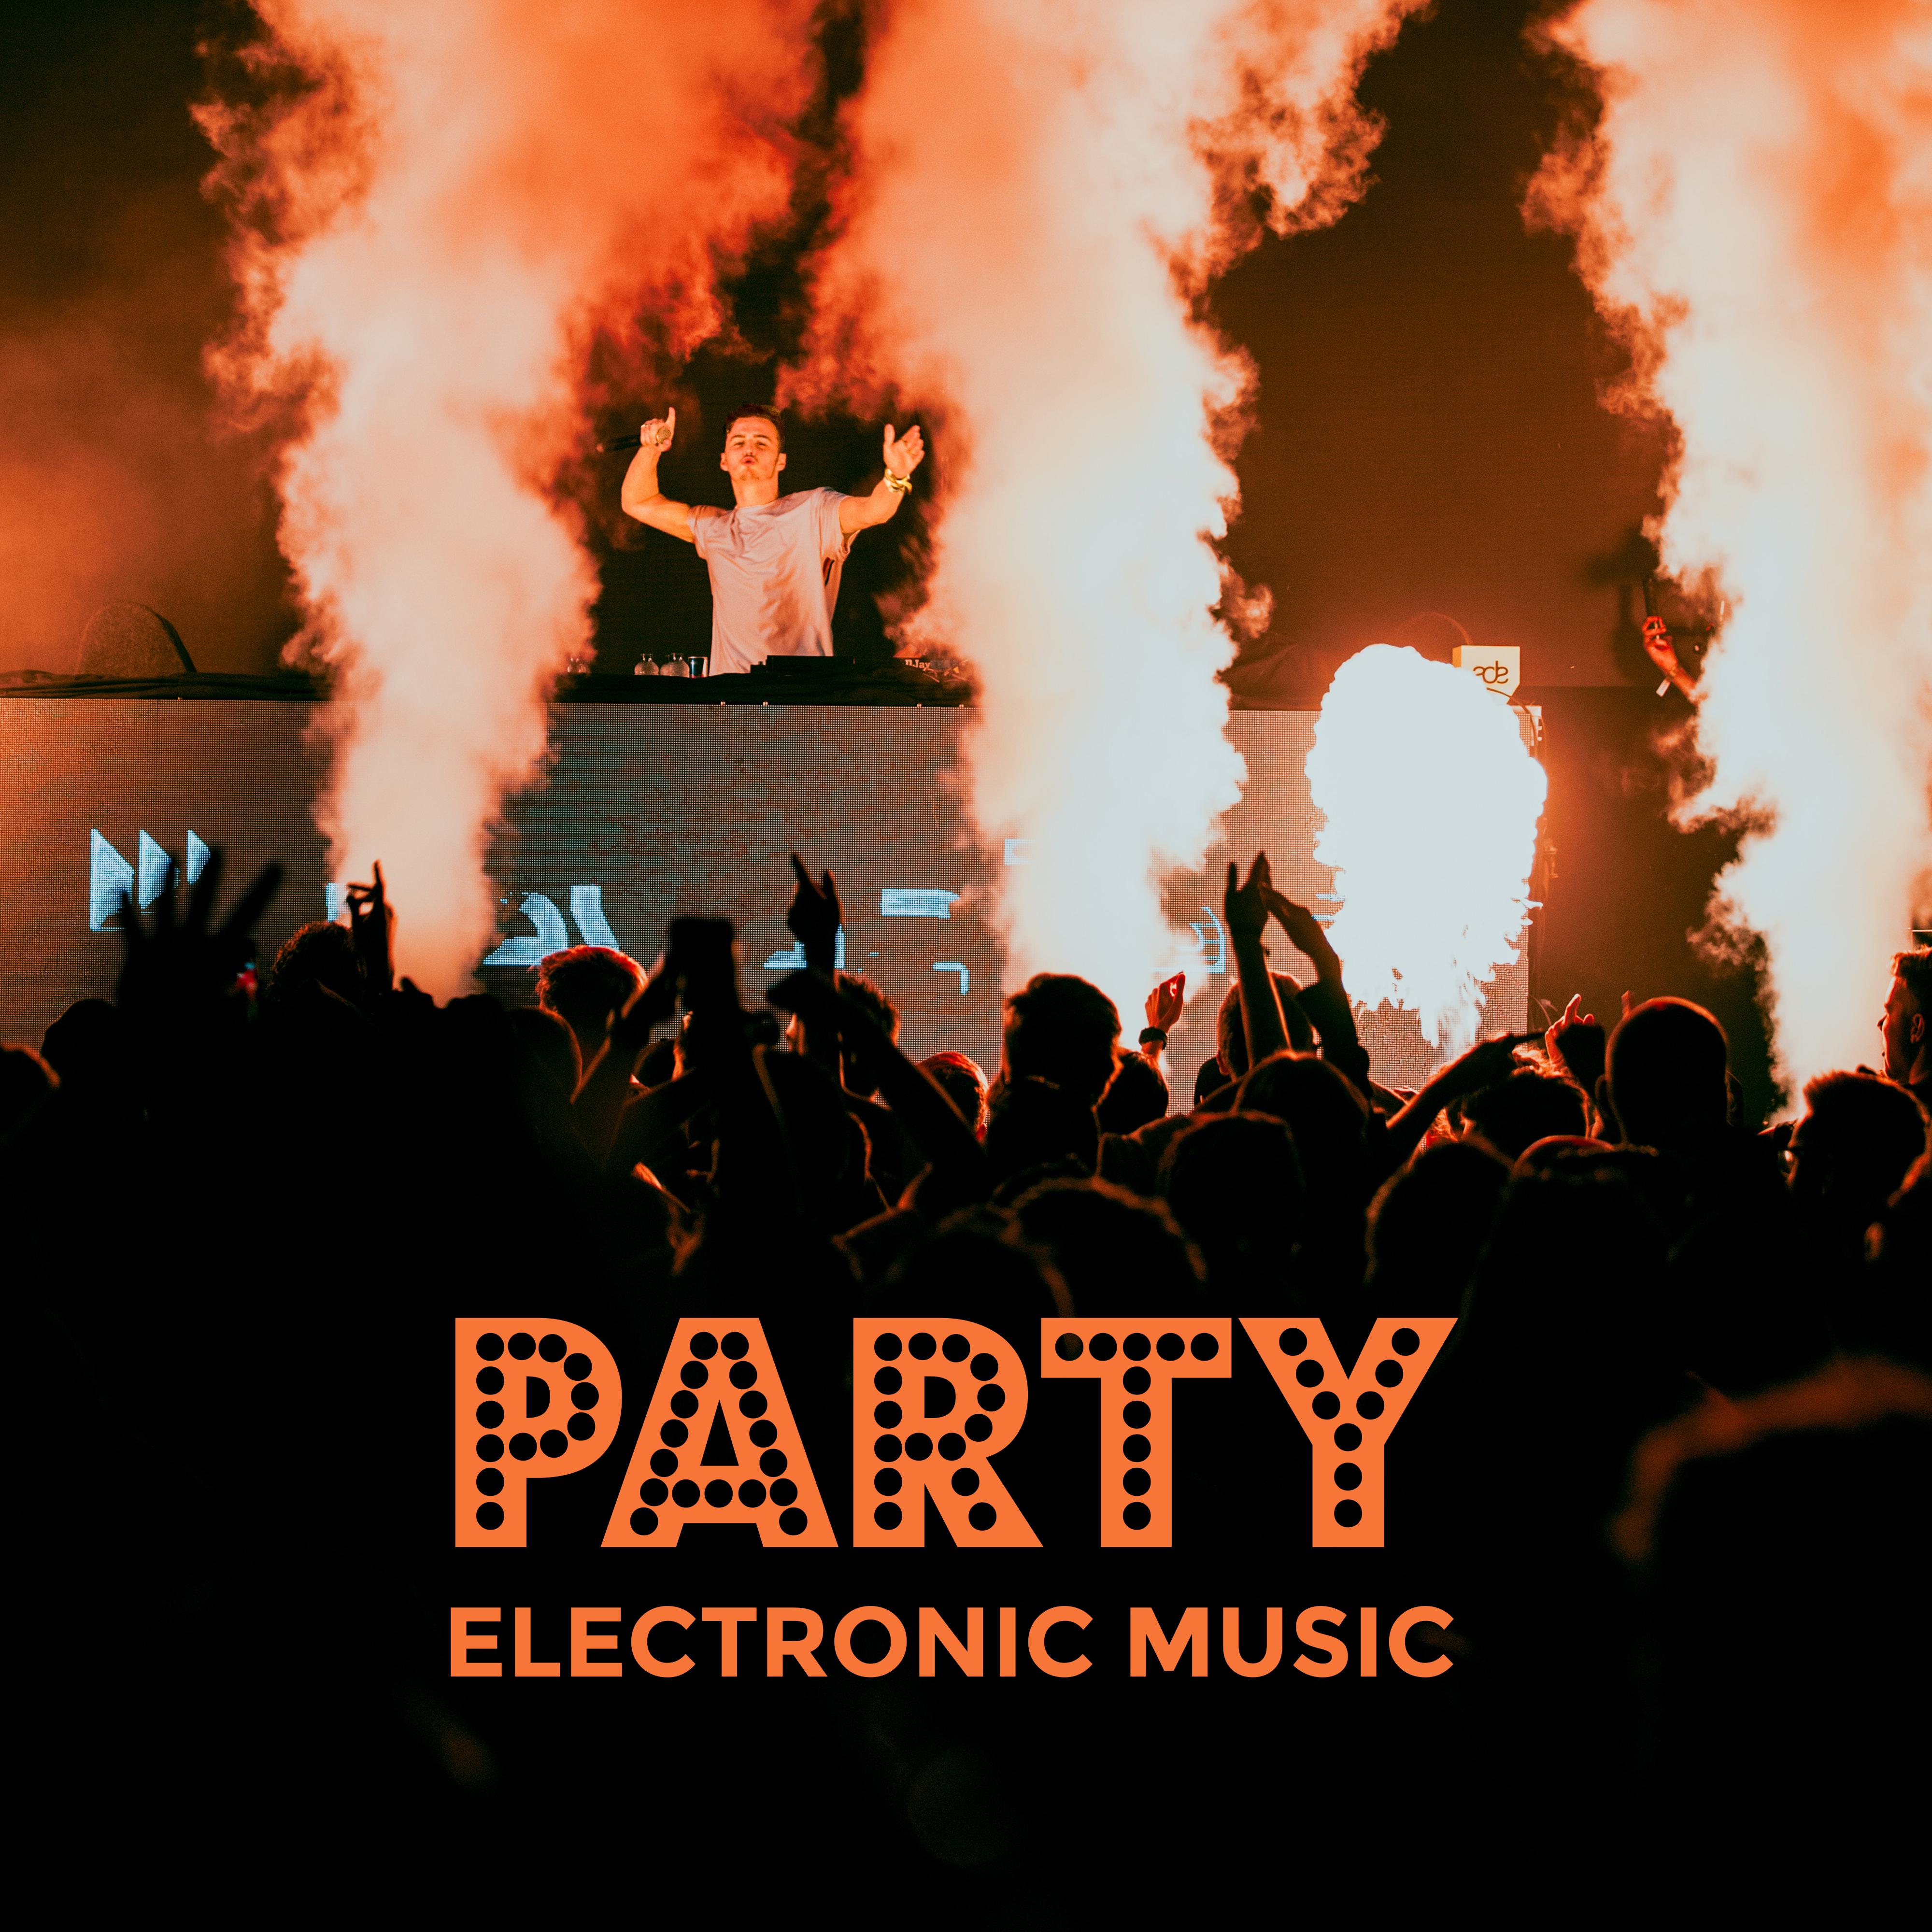 Party Electronic Music: Chillout 2019 Vibes for Dance Party, Slow Electro Beats, Low BPM, Relaxing Smooth Melodies